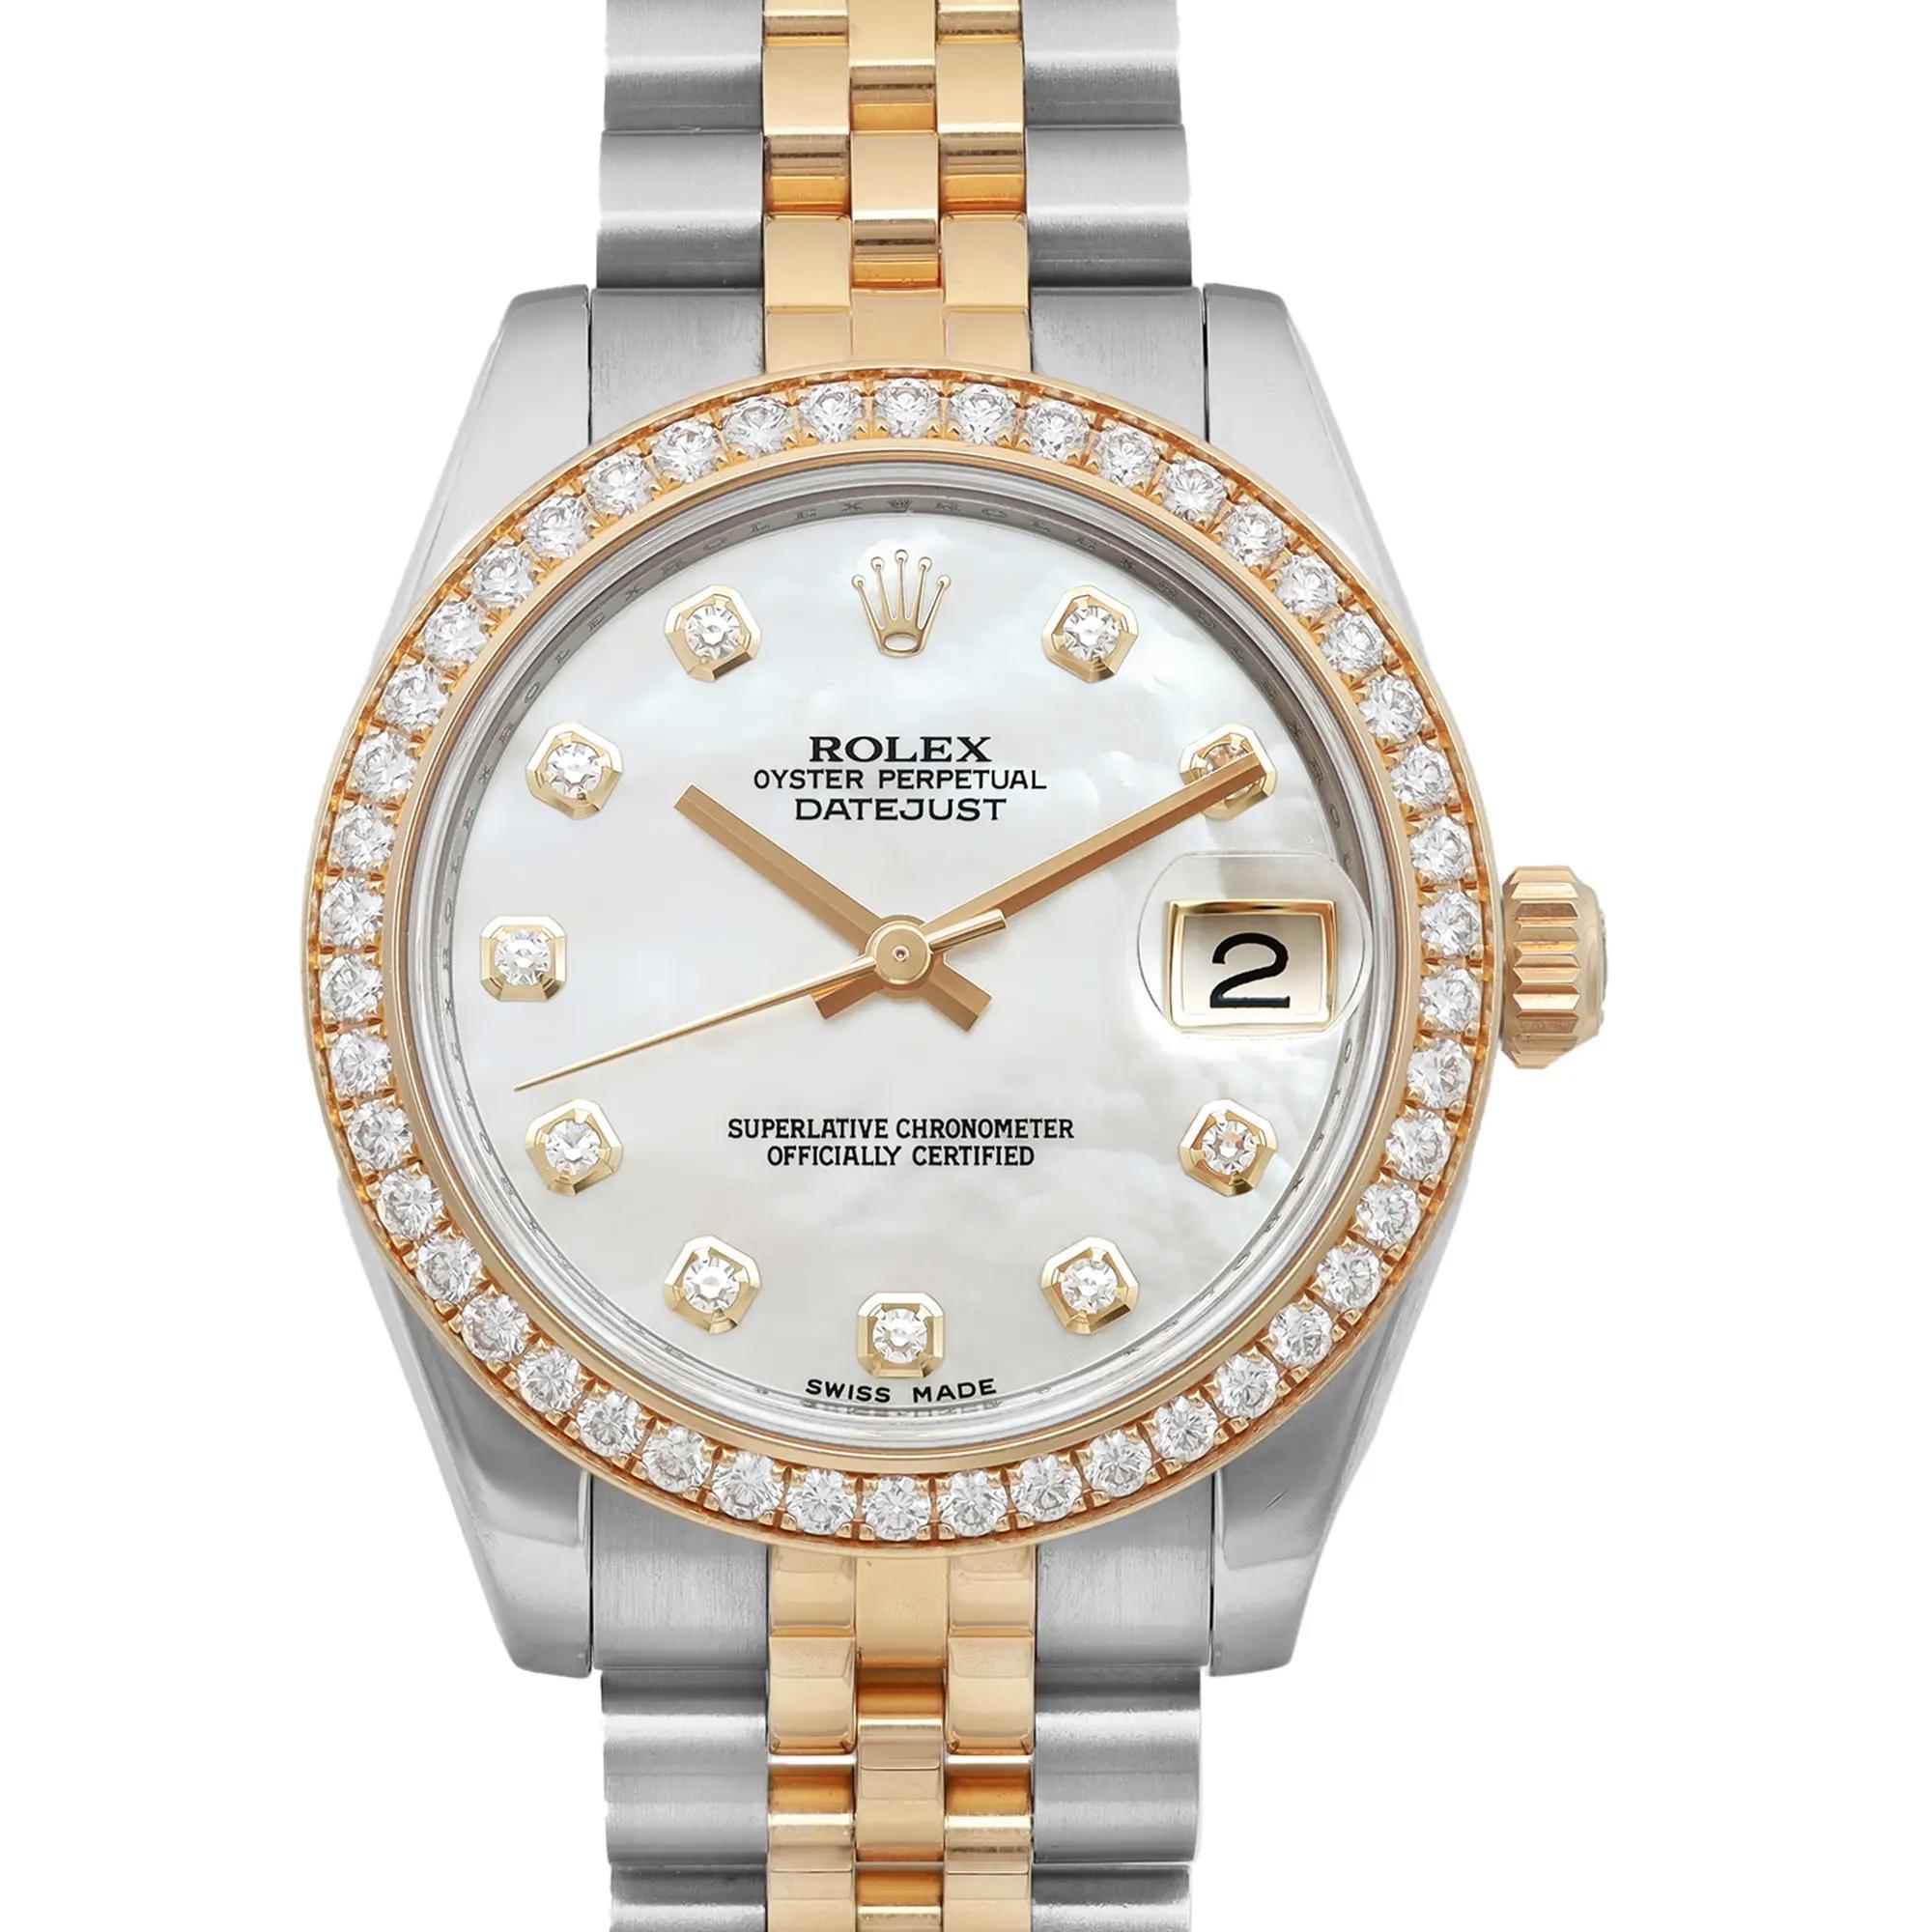 Pre-owned. Comes with a Rolex service card dated 2020. 

Brand and Model Information:
Brand: Rolex
Model: Rolex Datejust 178383
Model Number: 178383

Type and Style:
Type: Wristwatch
Style: Luxury
Department: Women
Display: Analog
Vintage: No
Year